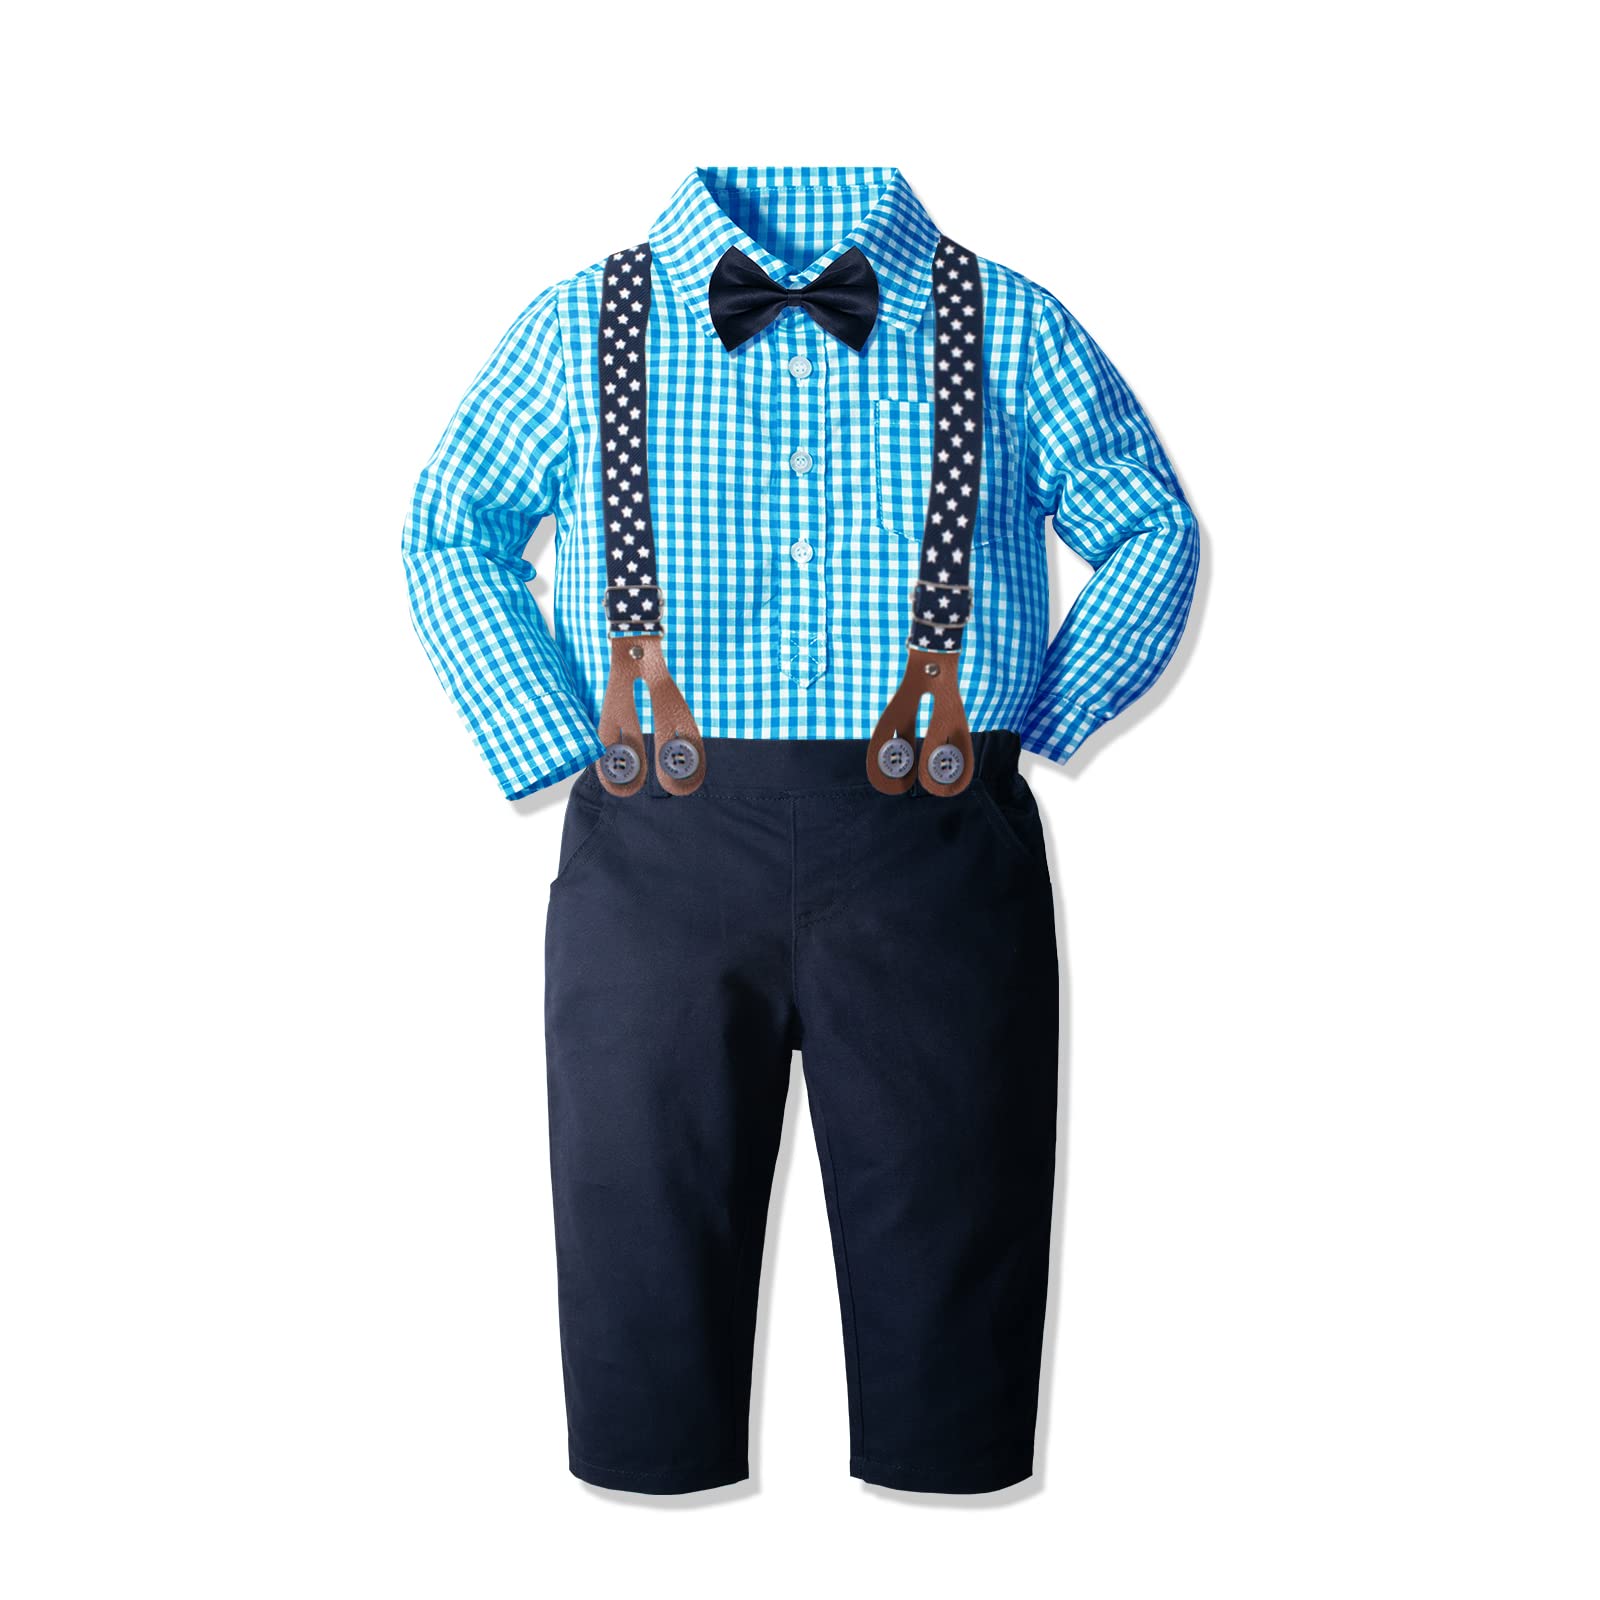 Yilaku Toddler Boy Dress Clothes Baby Boy Outfits with Bowtie+Suspender Pants Sets Toddler Suit for Boys 3 Months-4 Years